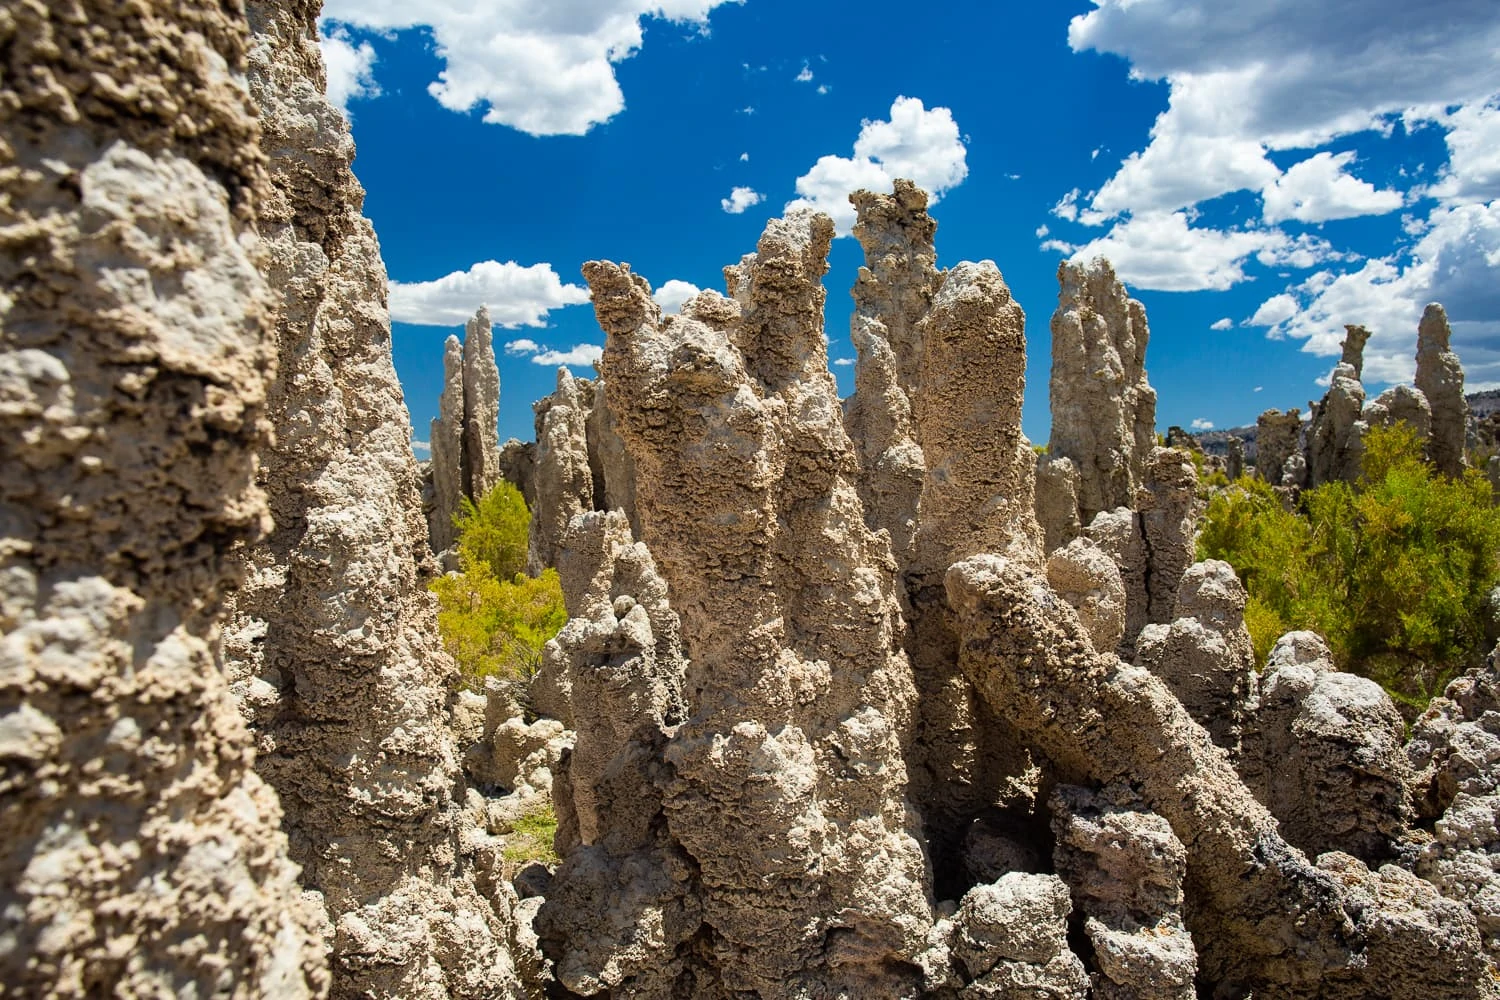 Strange looking spires of tufa crowd together on the shore of mono lake, a unique place to elope in California.